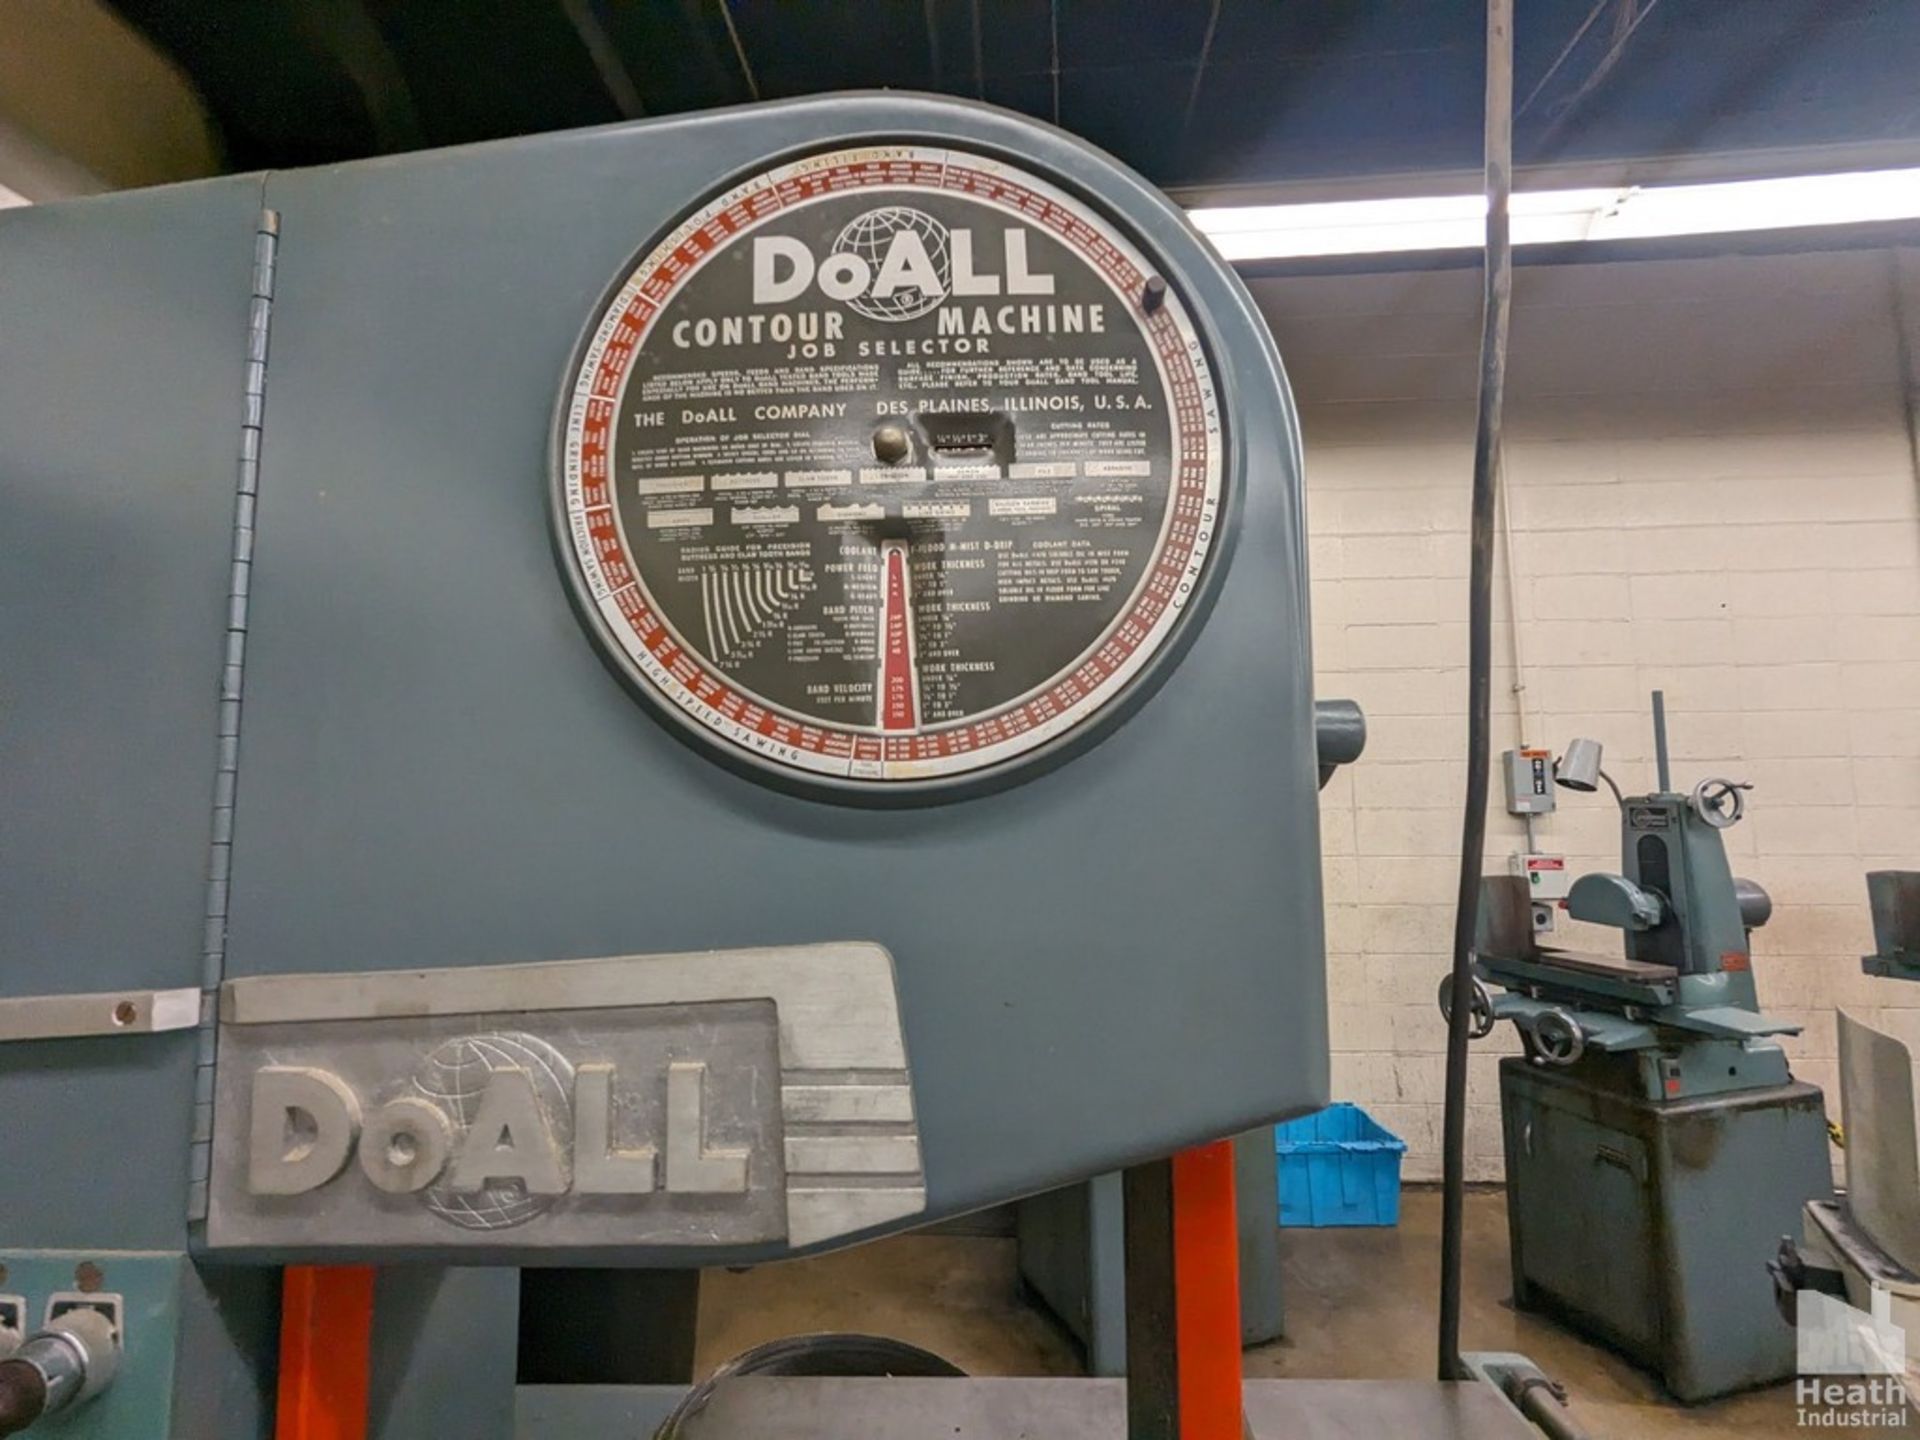 DOALL 16" MODEL 16-2 VERTICAL BAND SAW, S/N 45-55633 WITH BLADE WELDER Loading Fee :$150 - Image 2 of 8